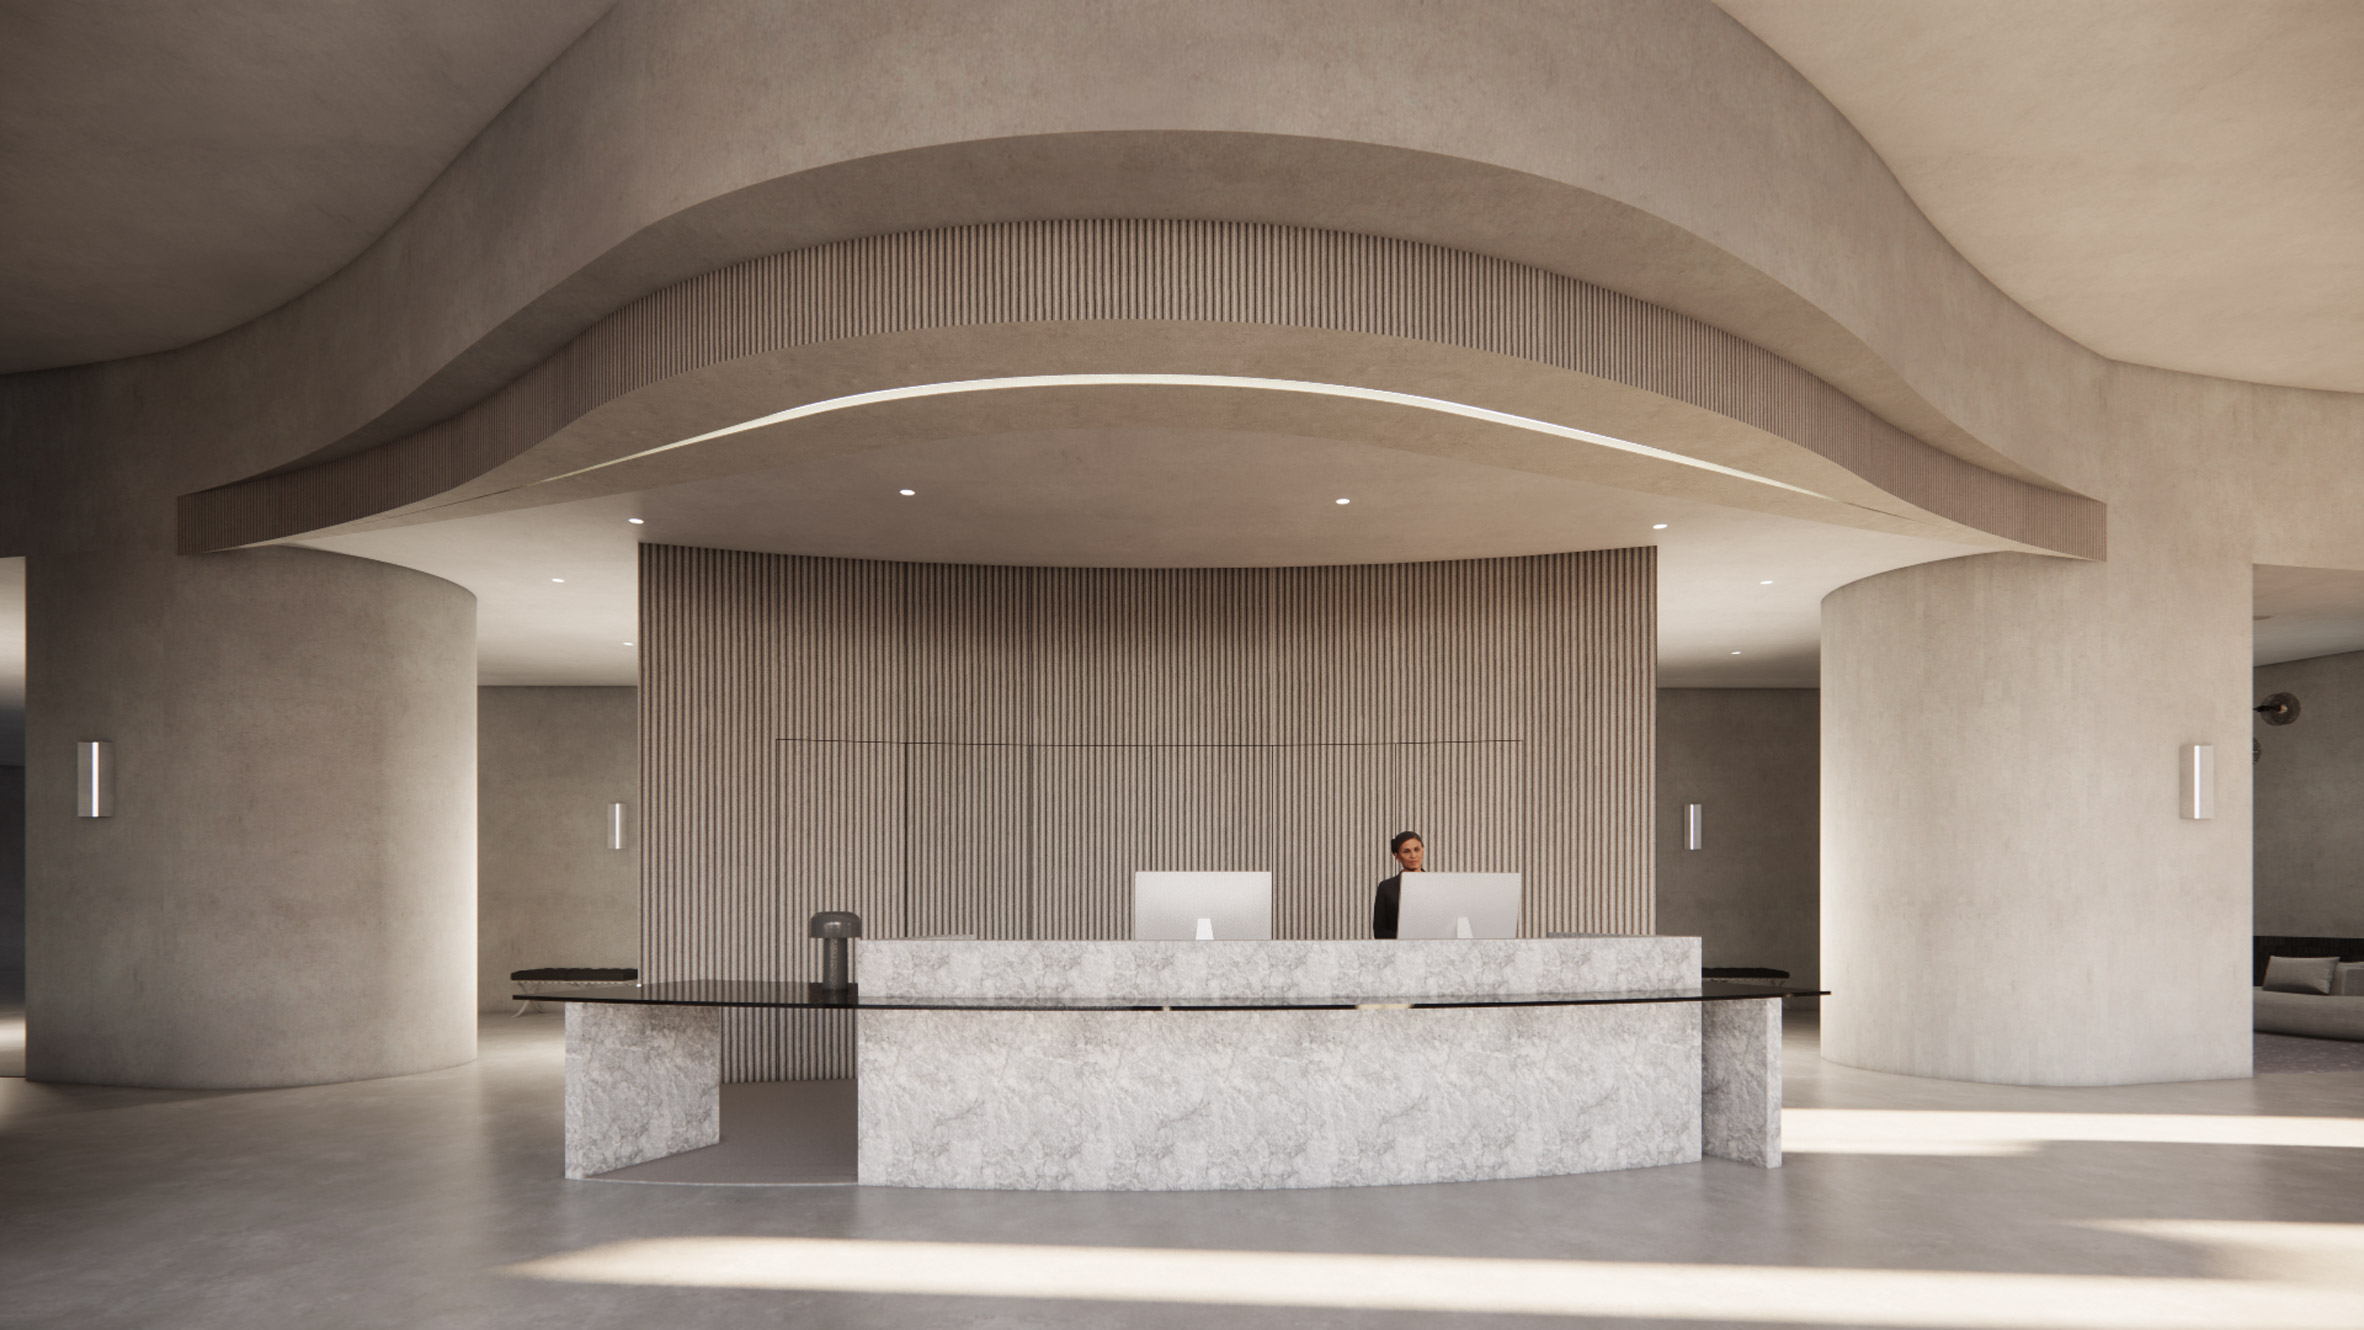 Rendering showing the interior of a lobby space with concrete pillars